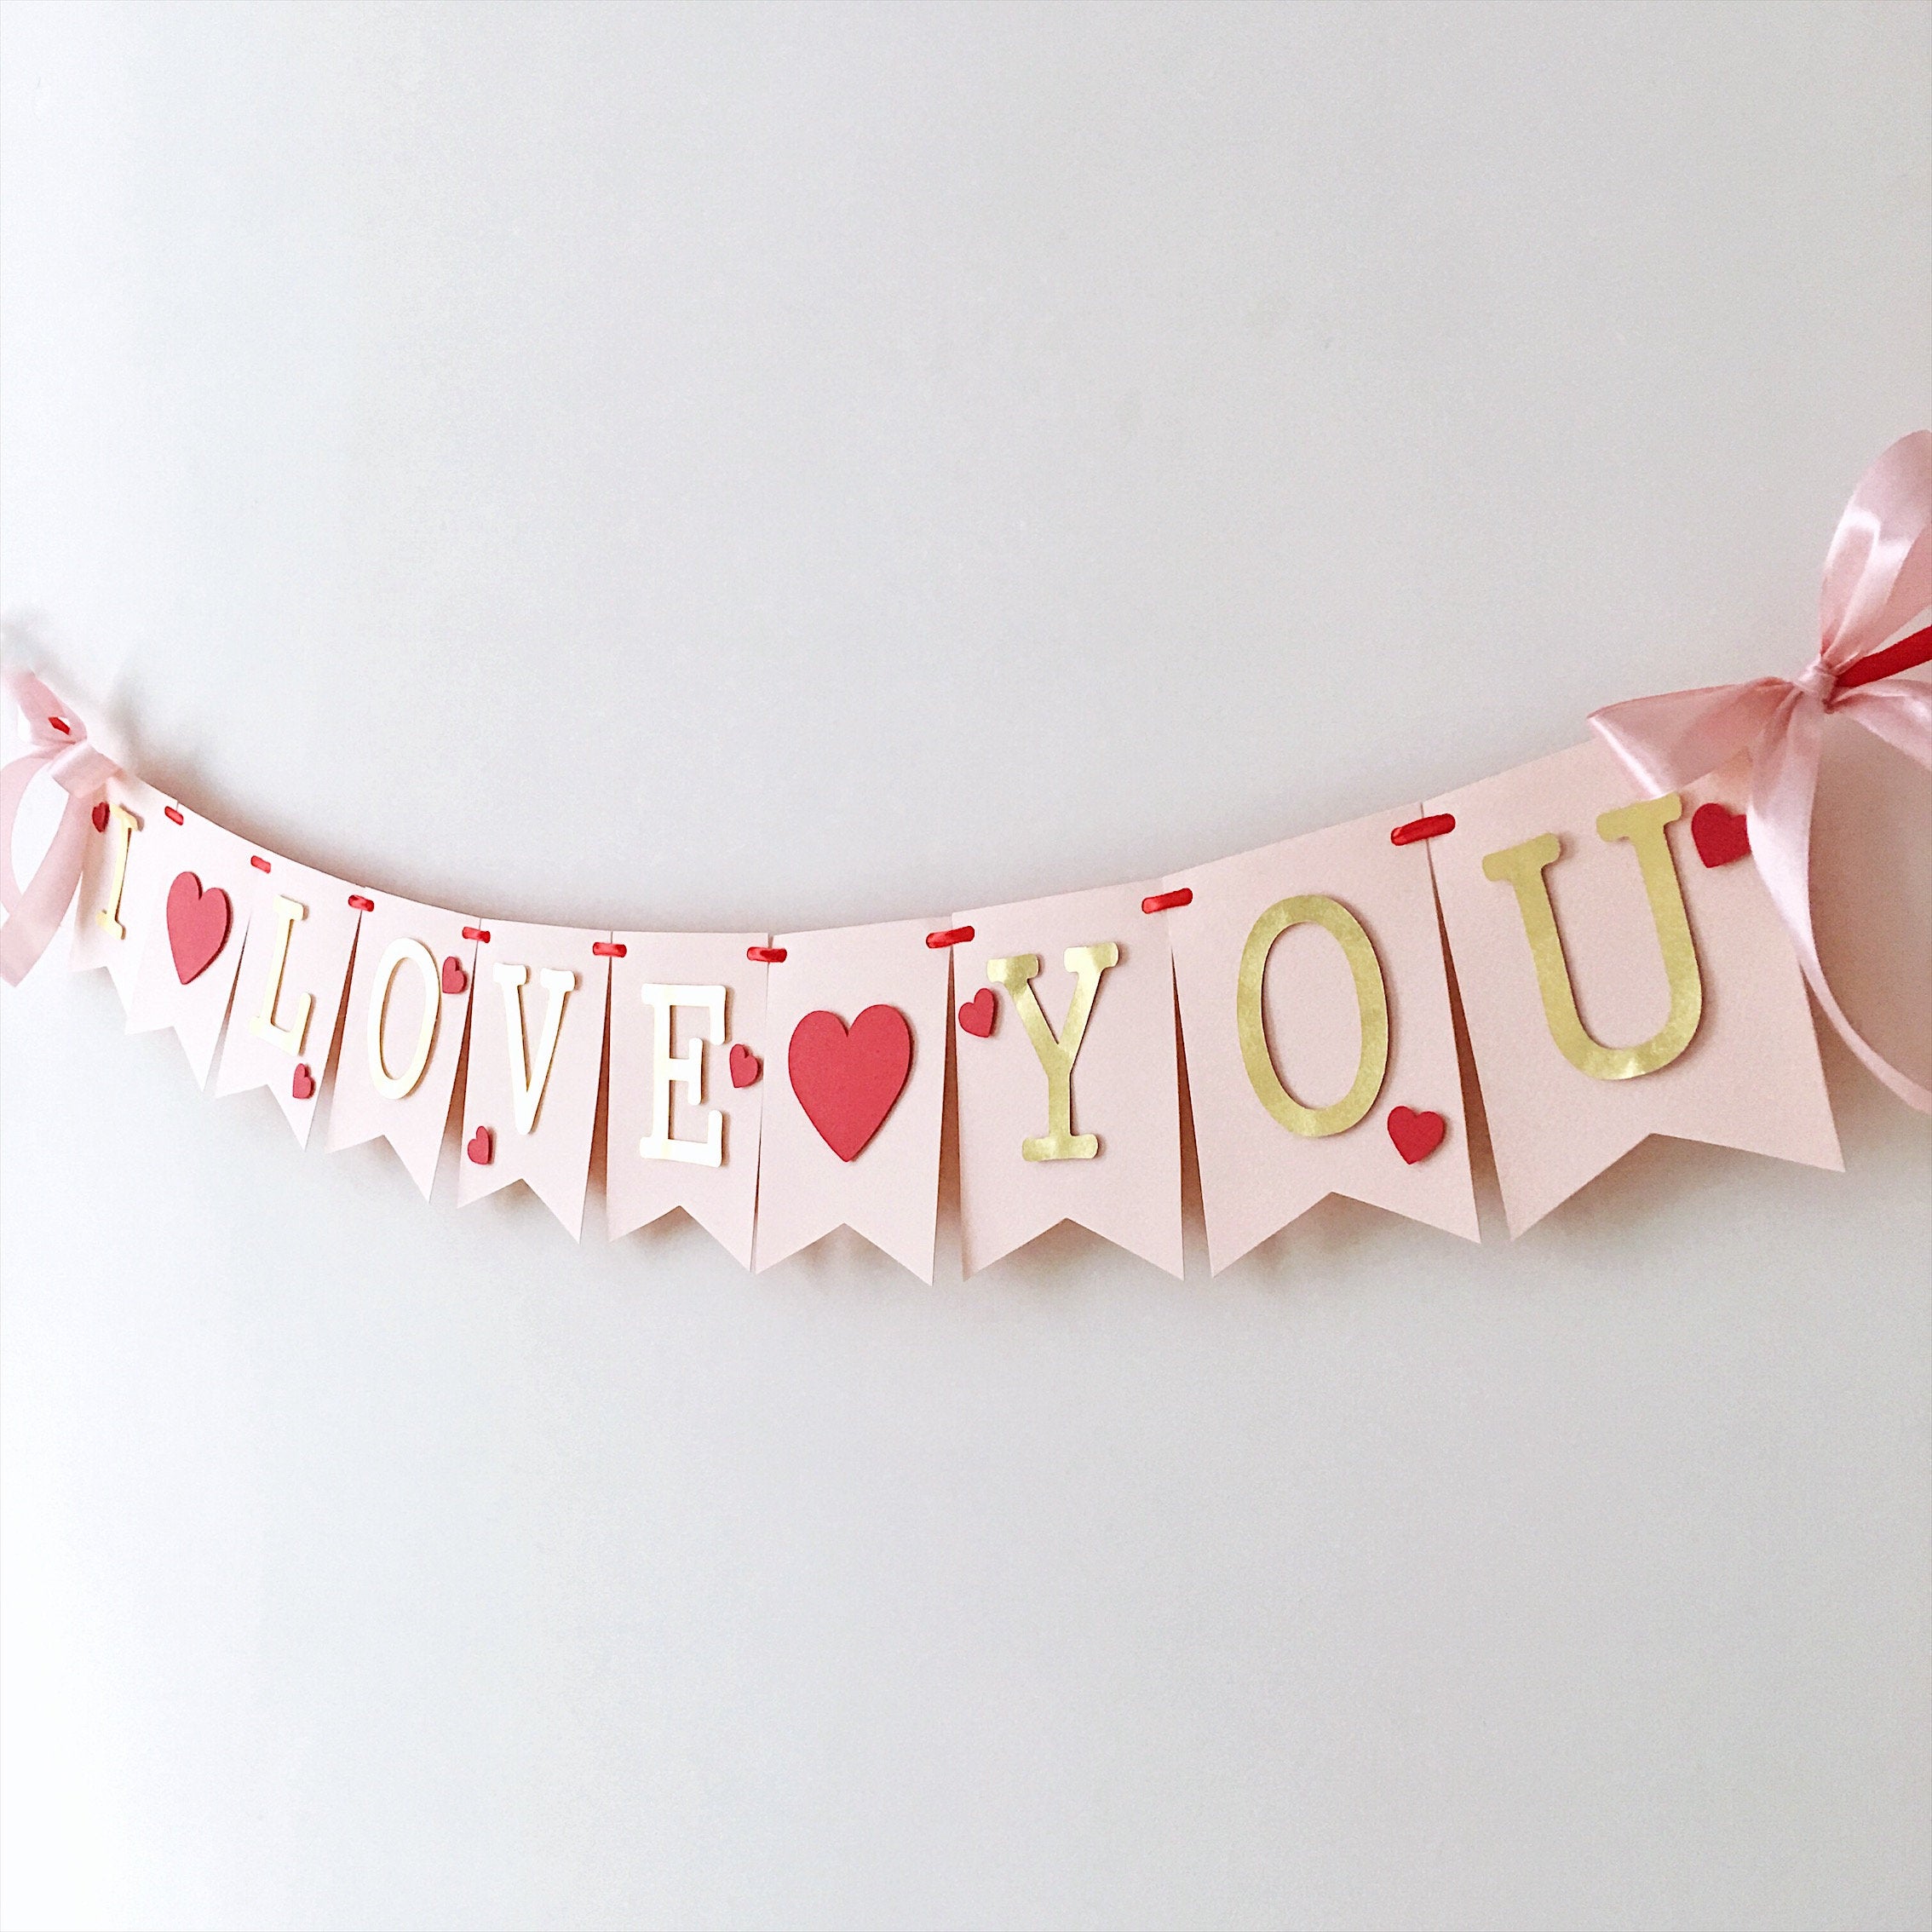 I Love You Banner Valentine's Day Banner Valentines Party Decorations Hugs and Kisses Xoxo Sign Red Hearts Be My Valentine Garland 